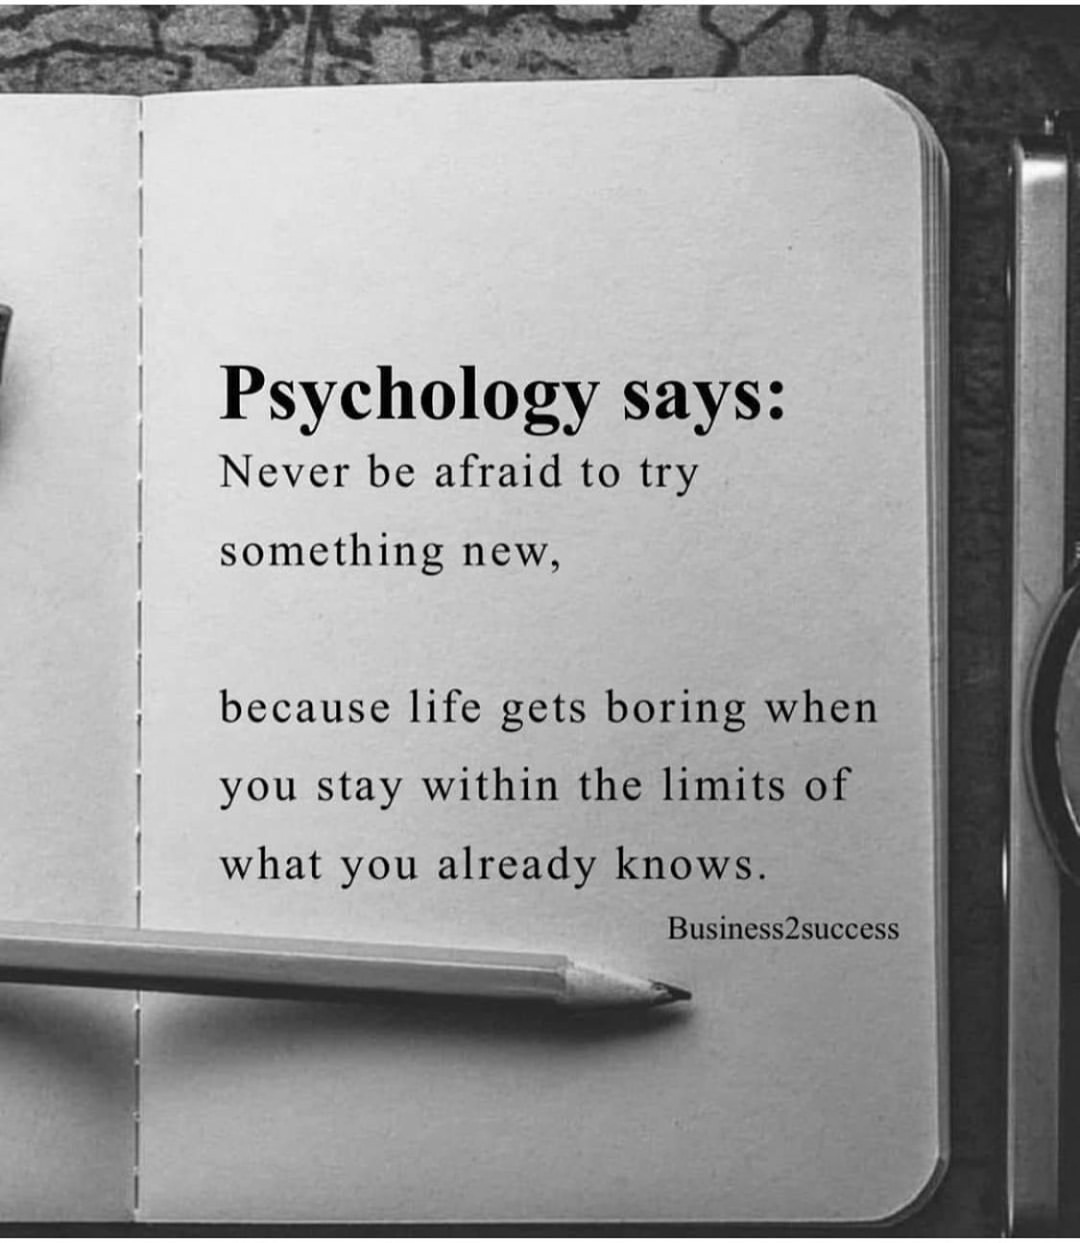 Psychology says: Never be afraid to try something new, because life gets boring when you stay within the limits of what you already knows.